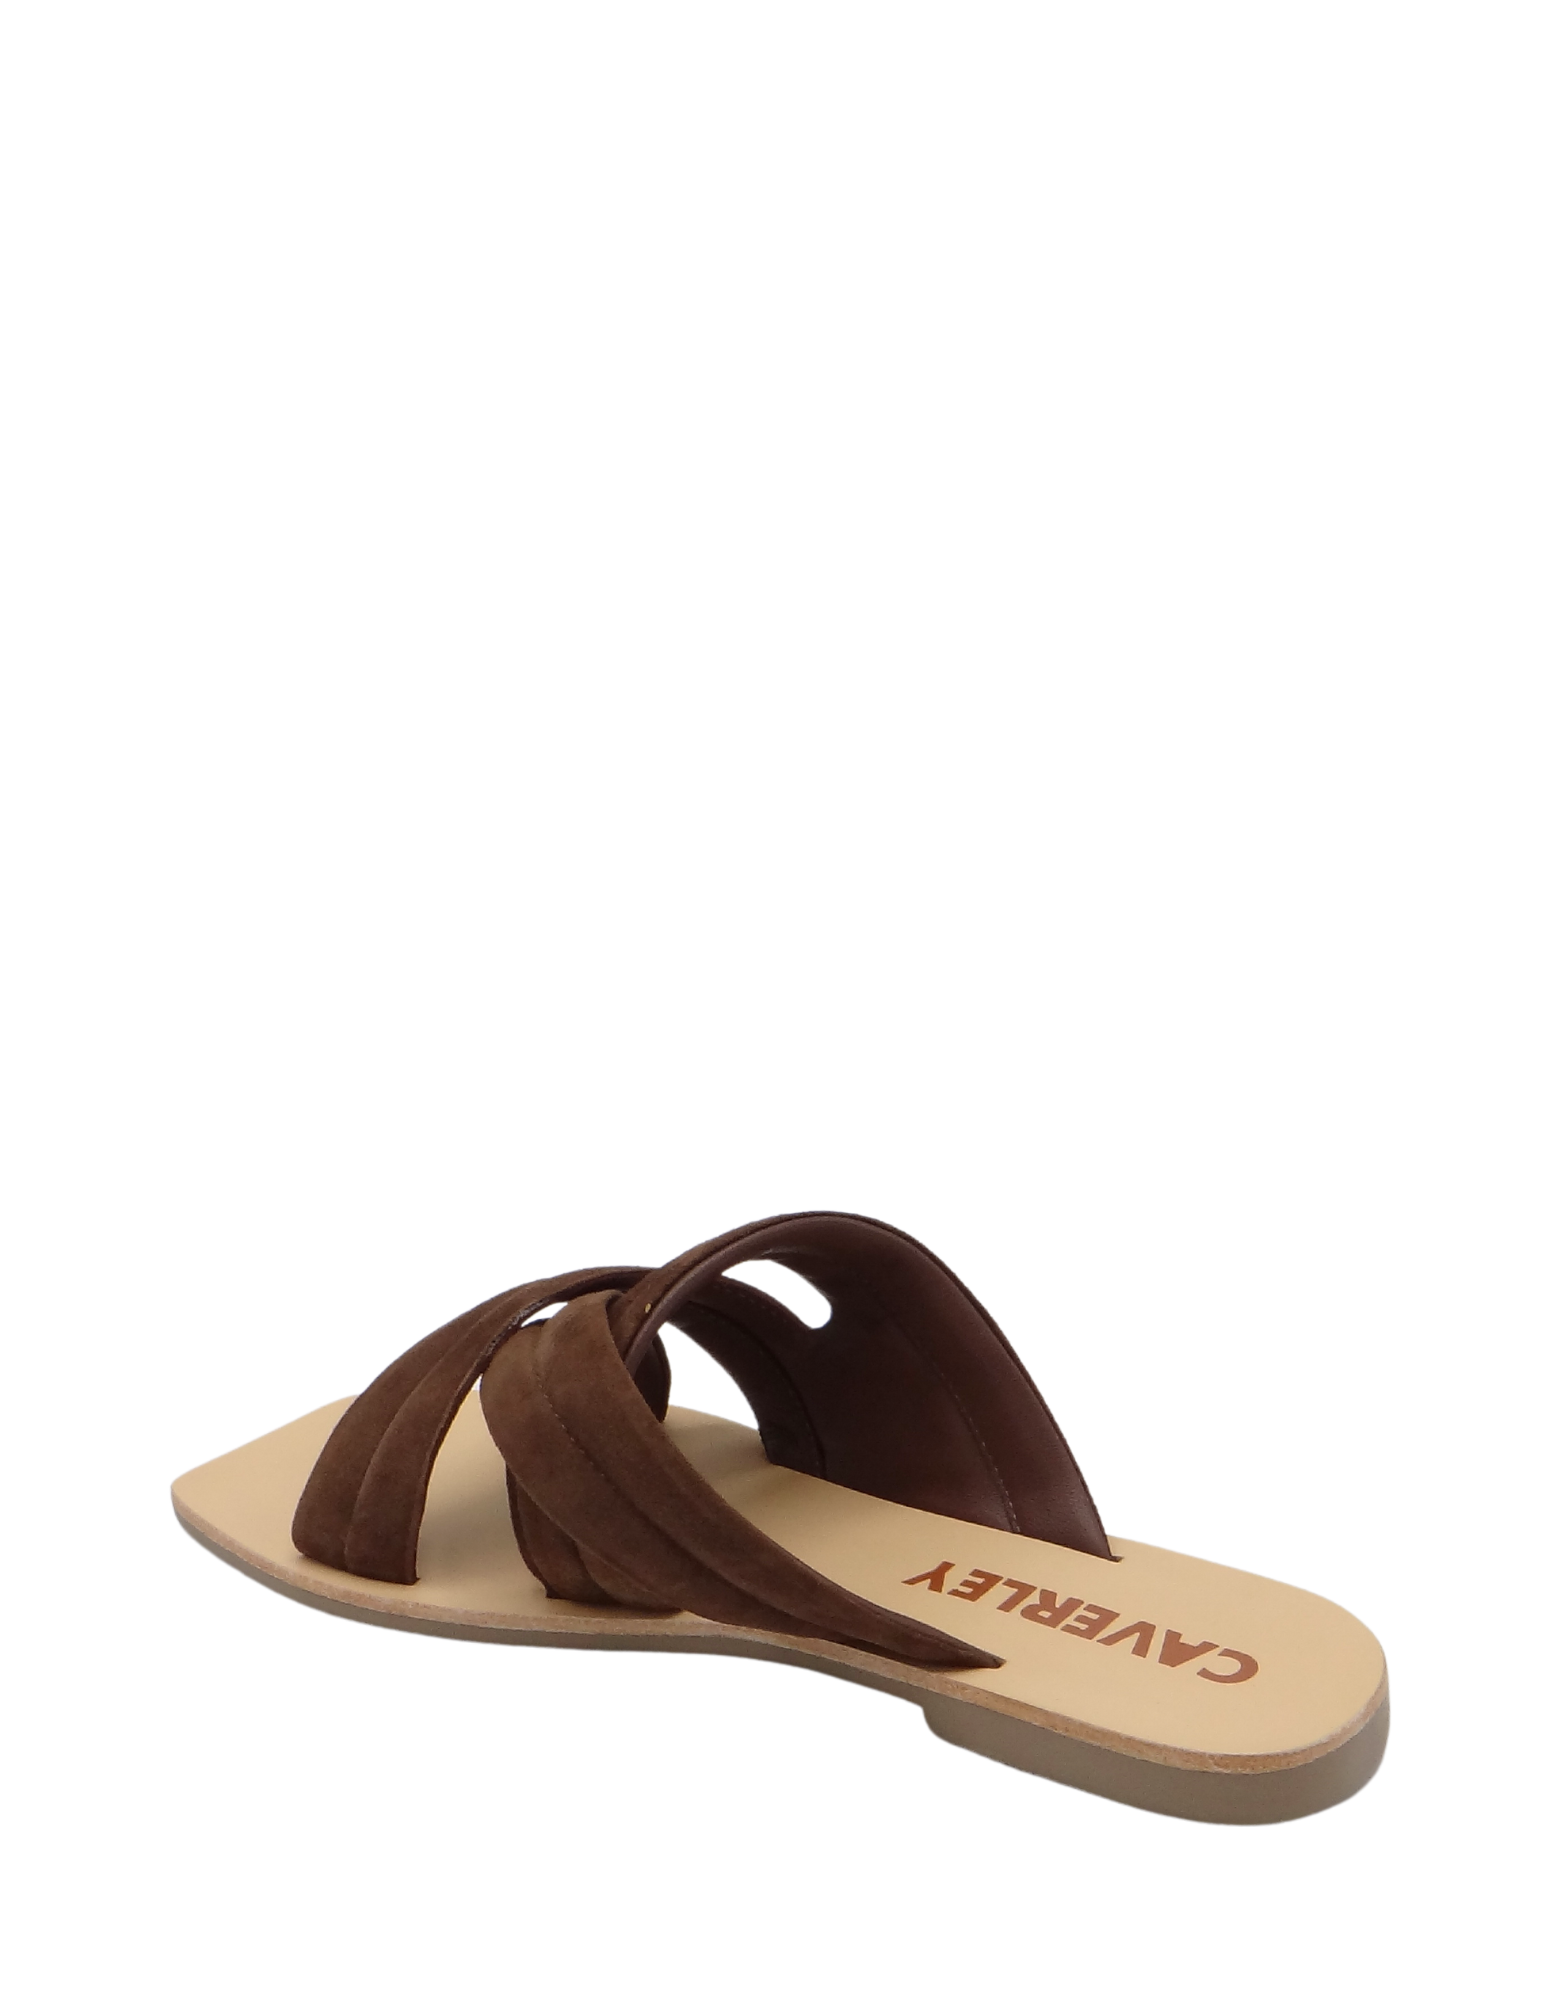 CAVERLEY Bennie Slide in Expresso Suede 23S516C Expresso Suede FROM EIGHTYWINGOLD - OFFICIAL BRAND PARTNER